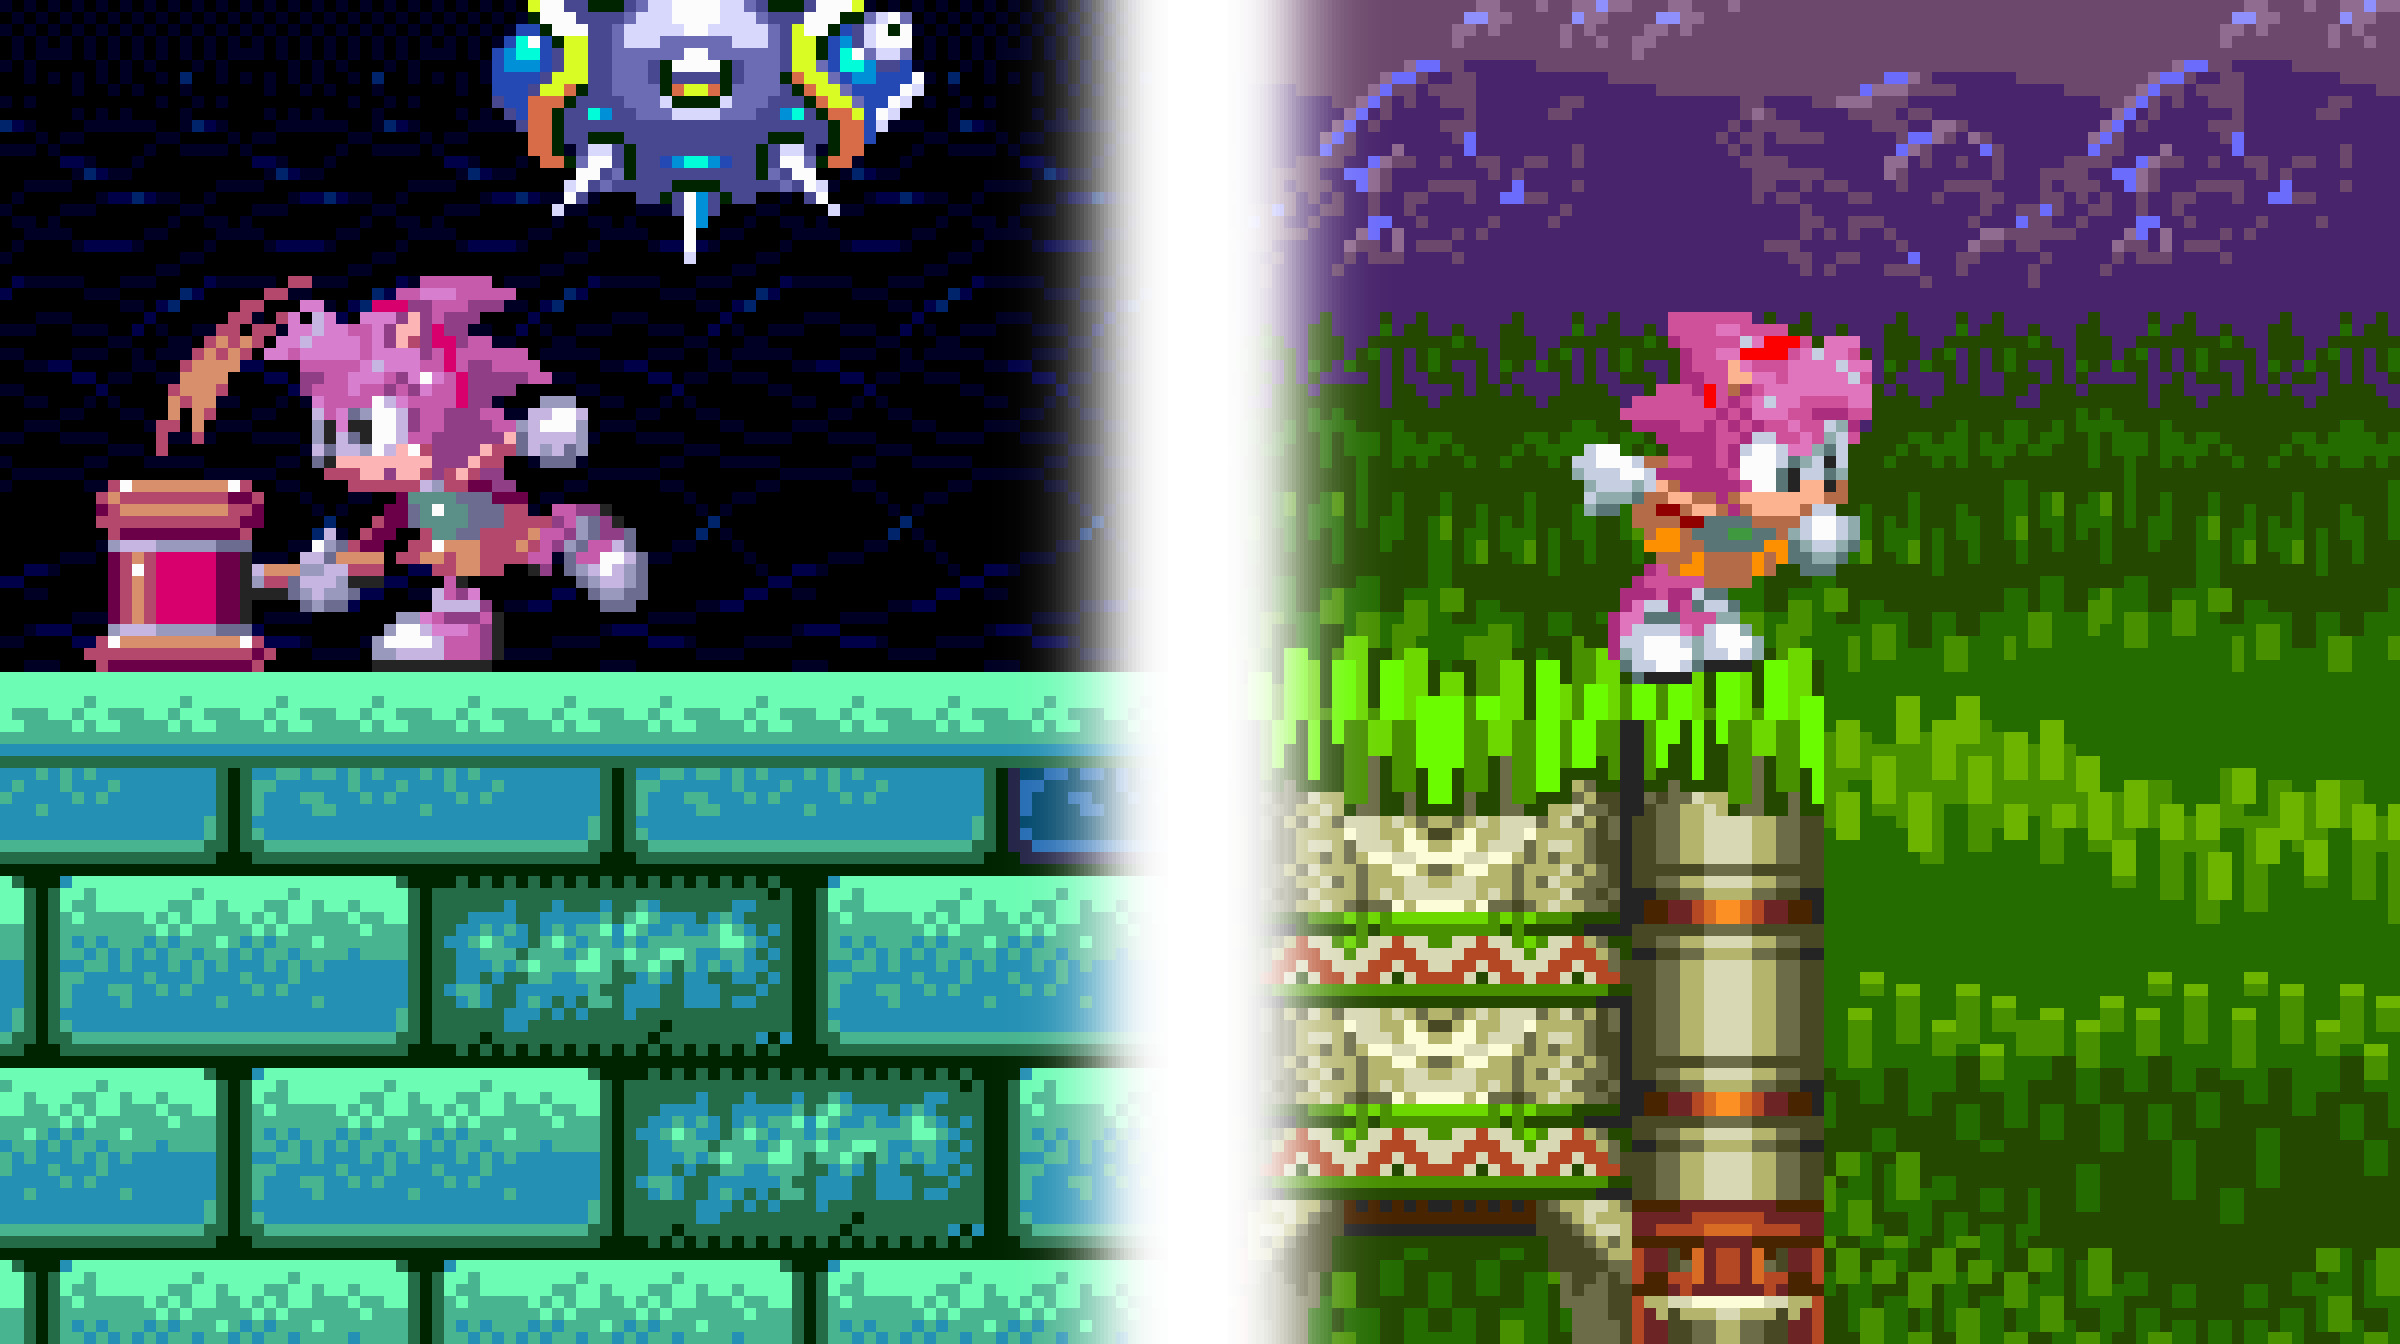 Fleetway Amy in Sonic 3 air [Sonic 3 A.I.R.] [Mods]